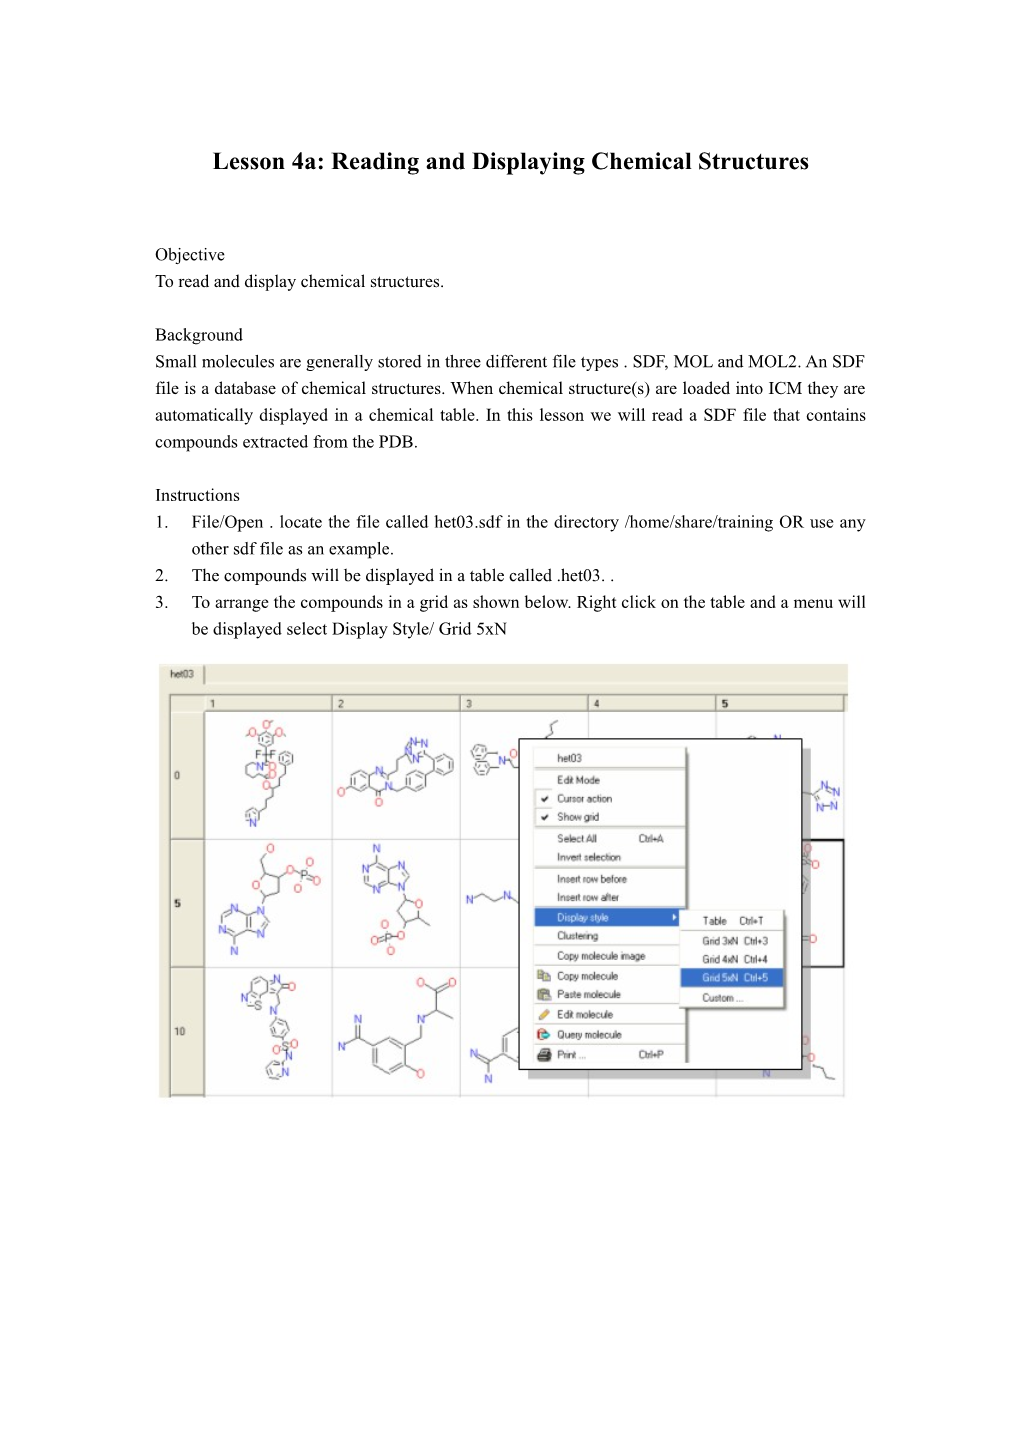 Lesson 4A: Reading and Displaying Chemical Structures